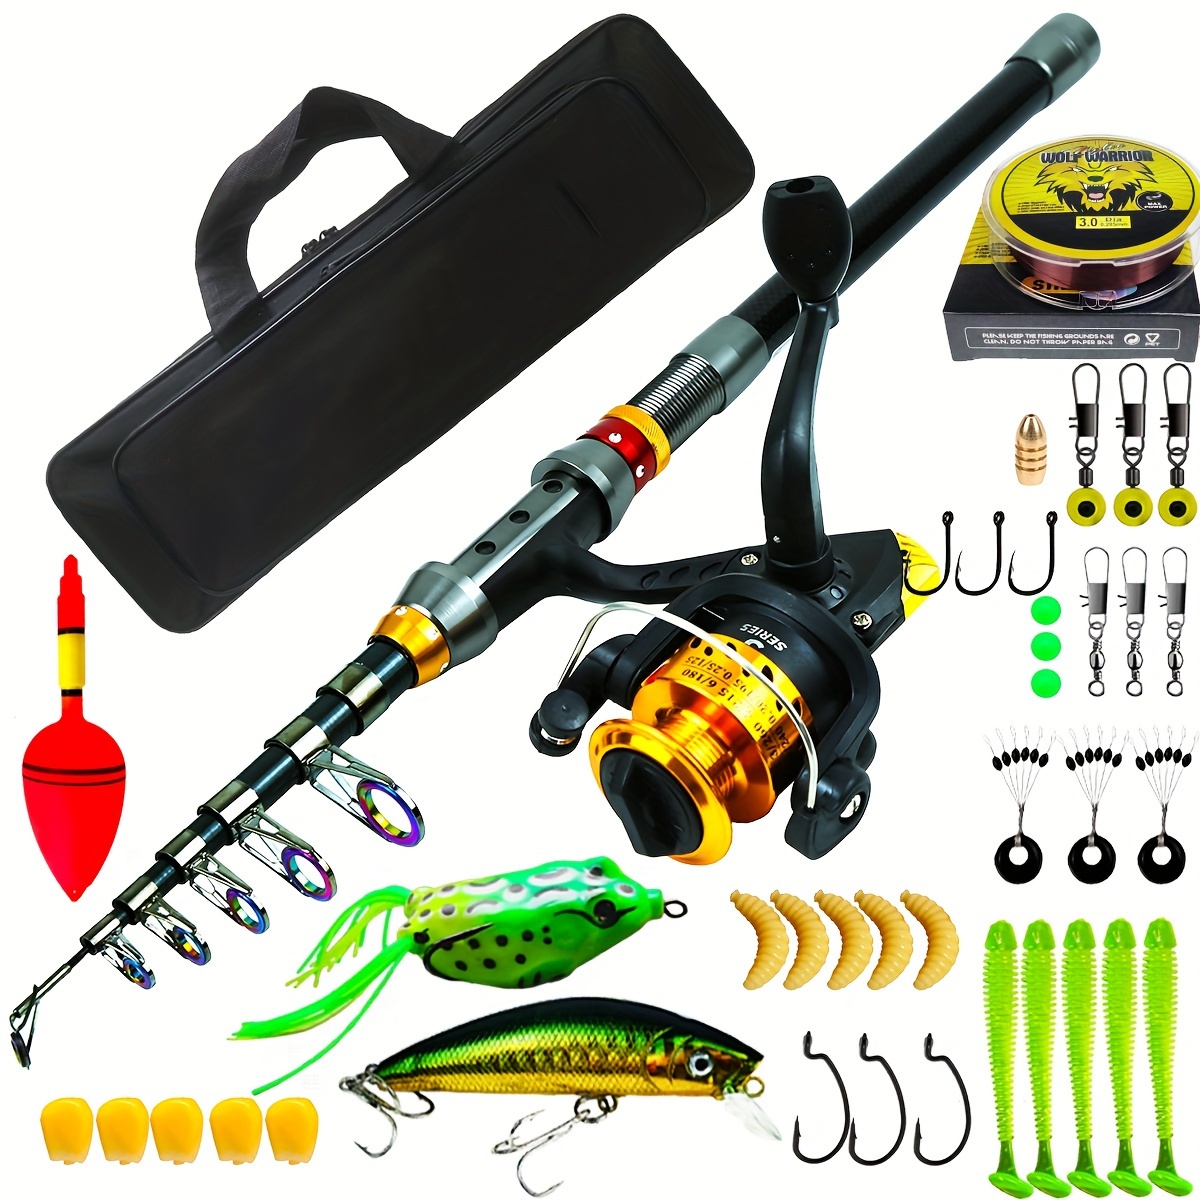 1set Beginner's Fishing Rod Set (1.2m/1.5m) With Extendable Handle